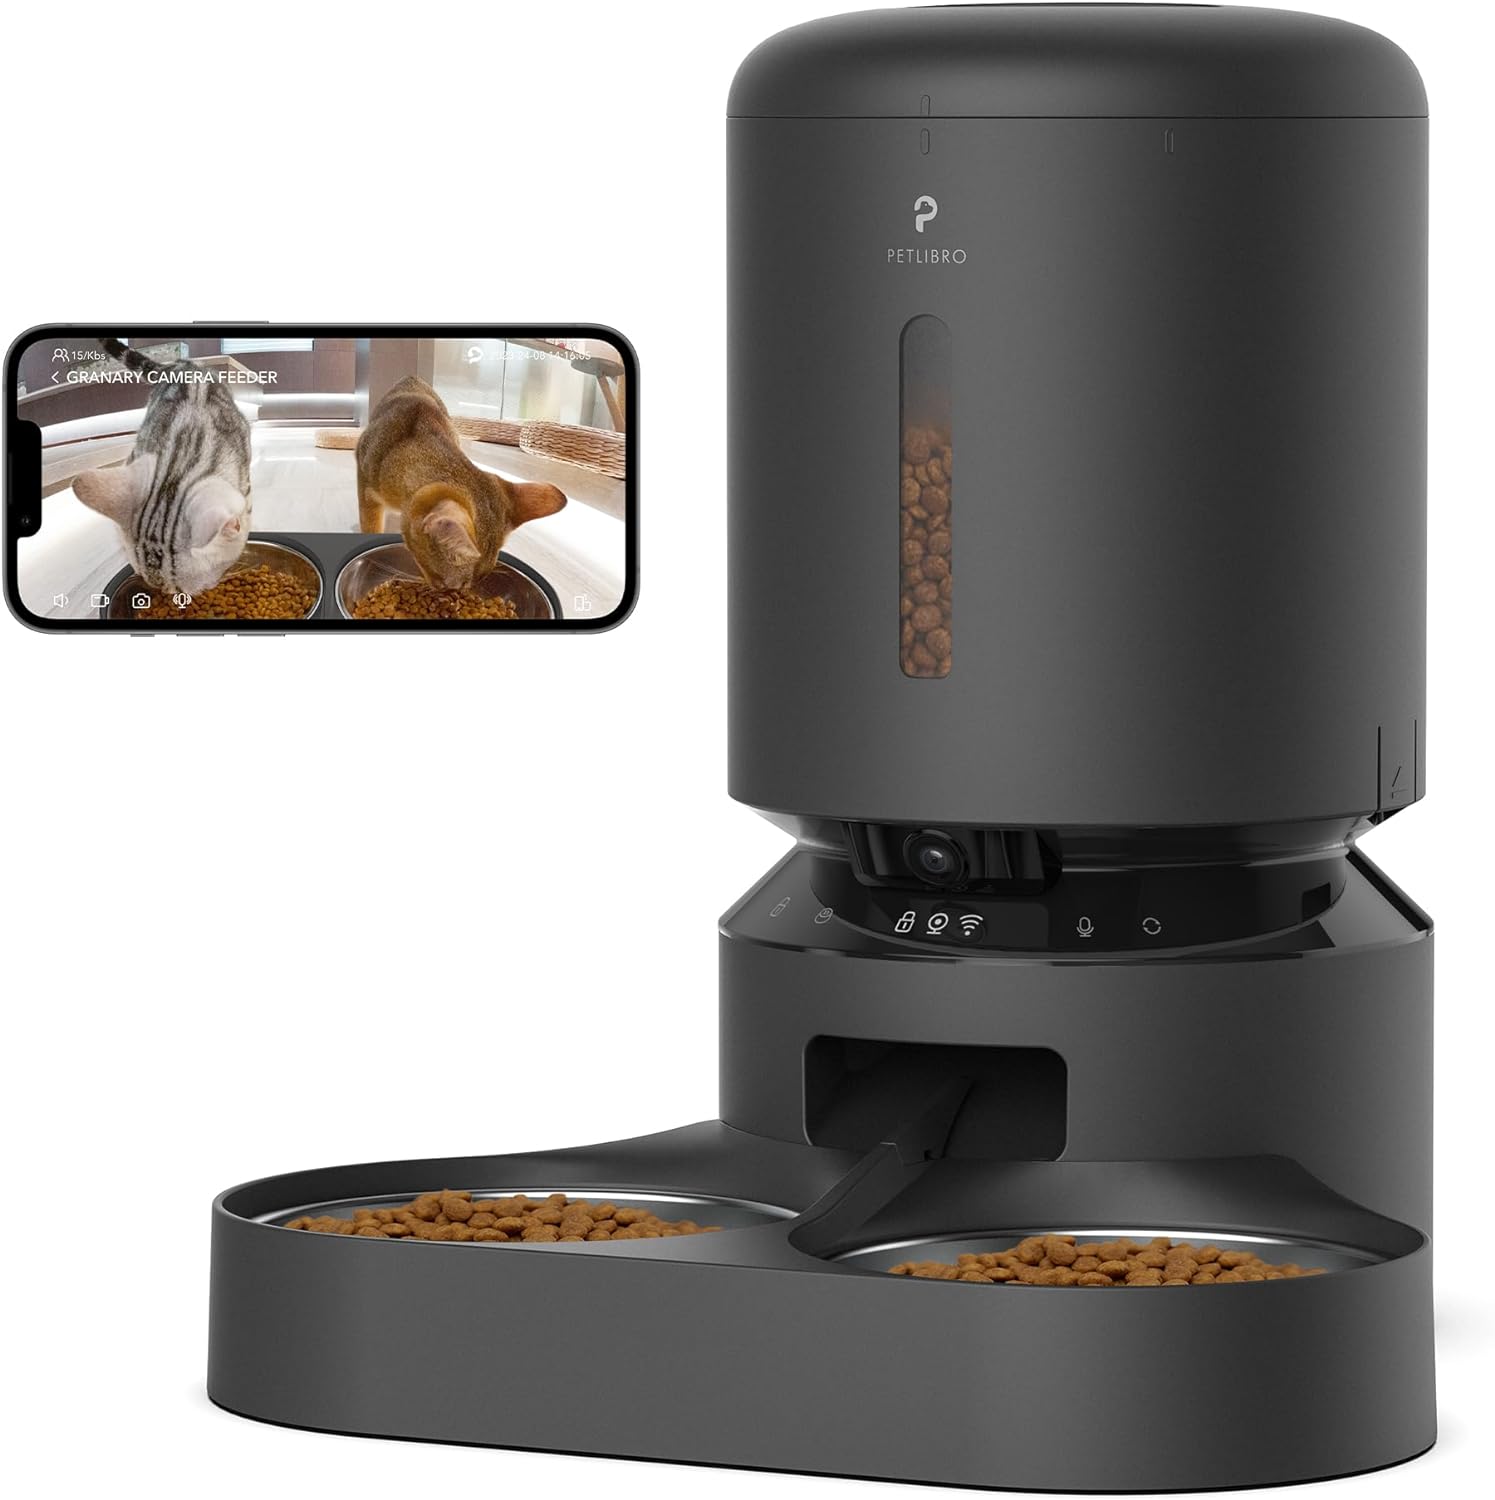 PETLIBRO Automatic Cat Feeder with Camera for Two Cats